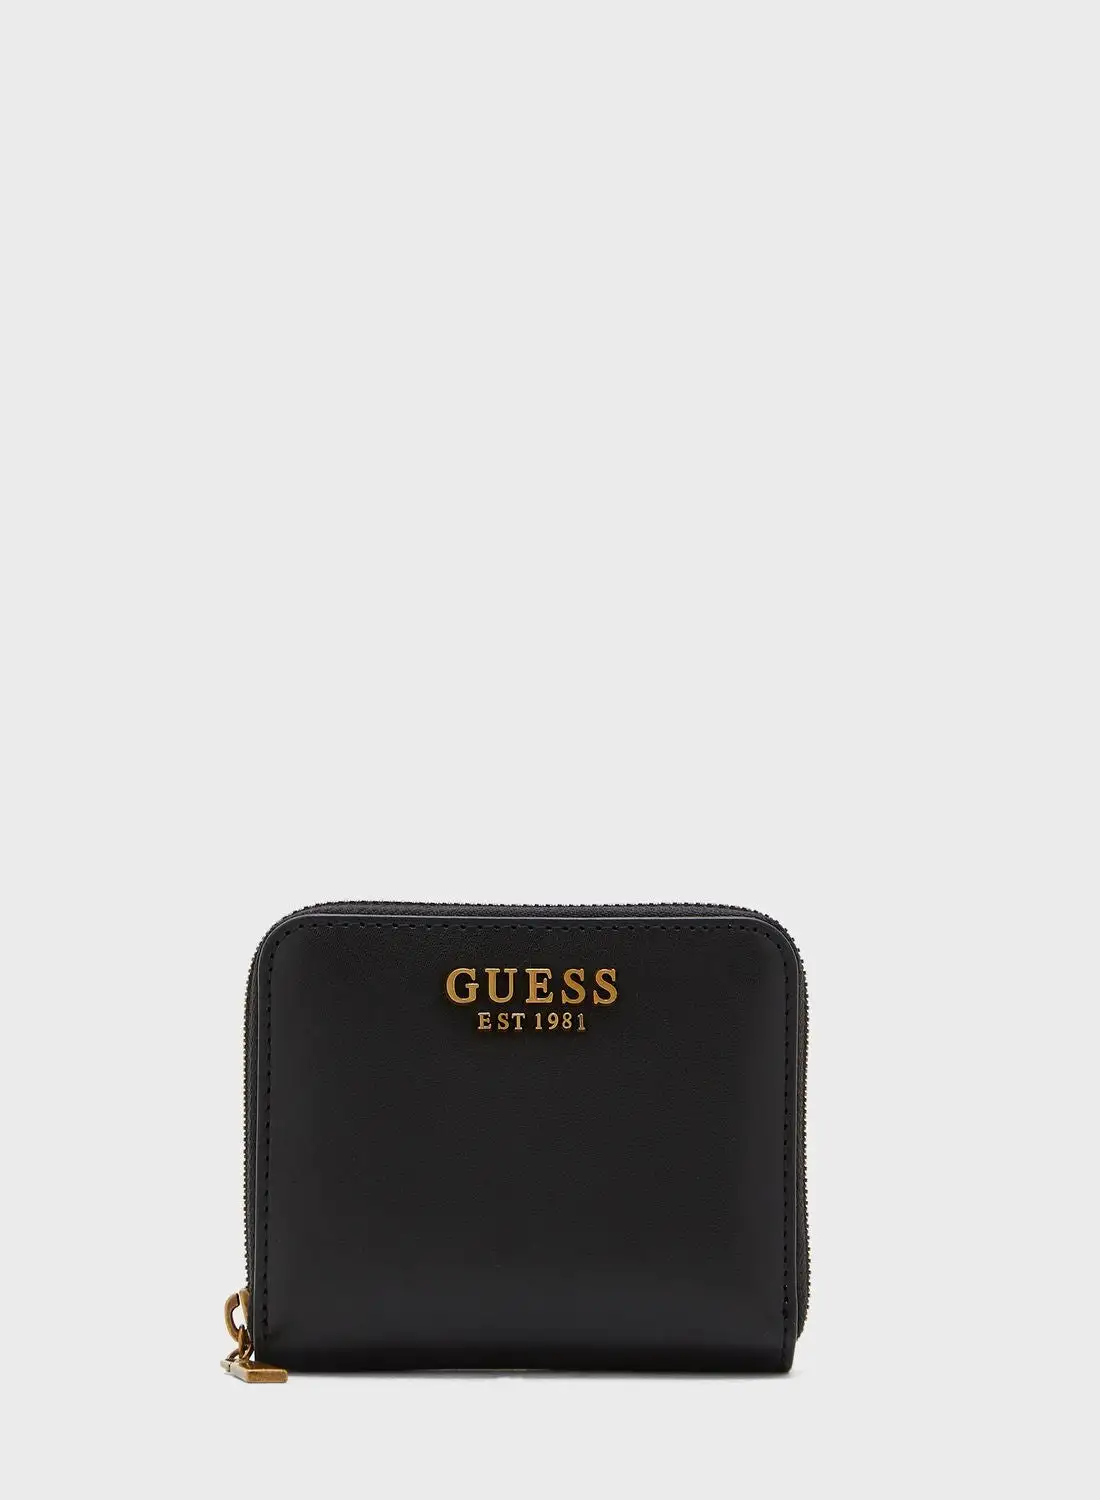 GUESS Laurel Small Zip Around Purse